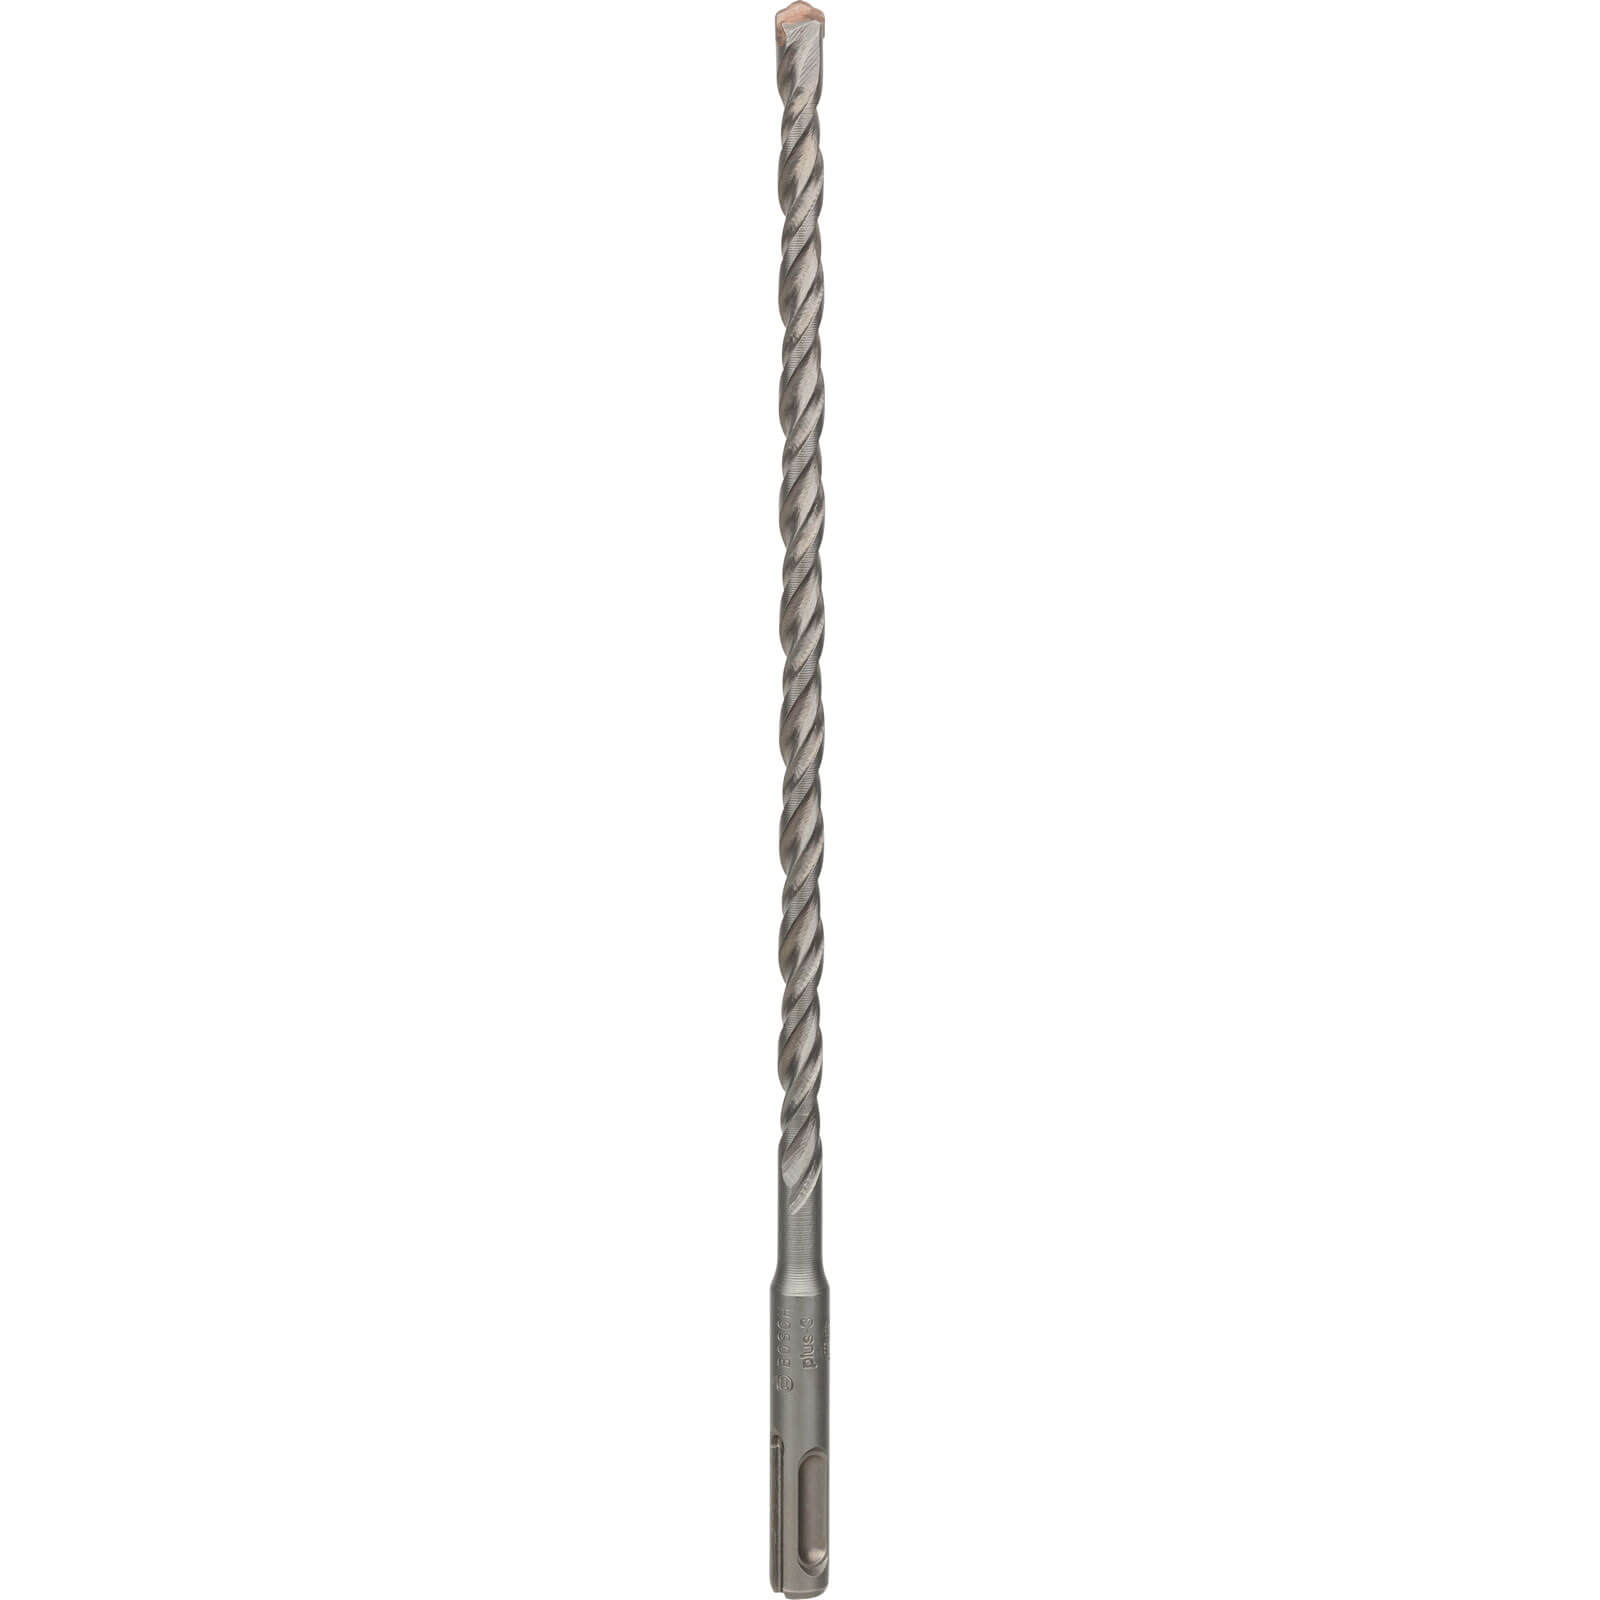 Image of Bosch Series 3 SDS Plus Masonry Drill Bit 8mm 260mm Pack of 1